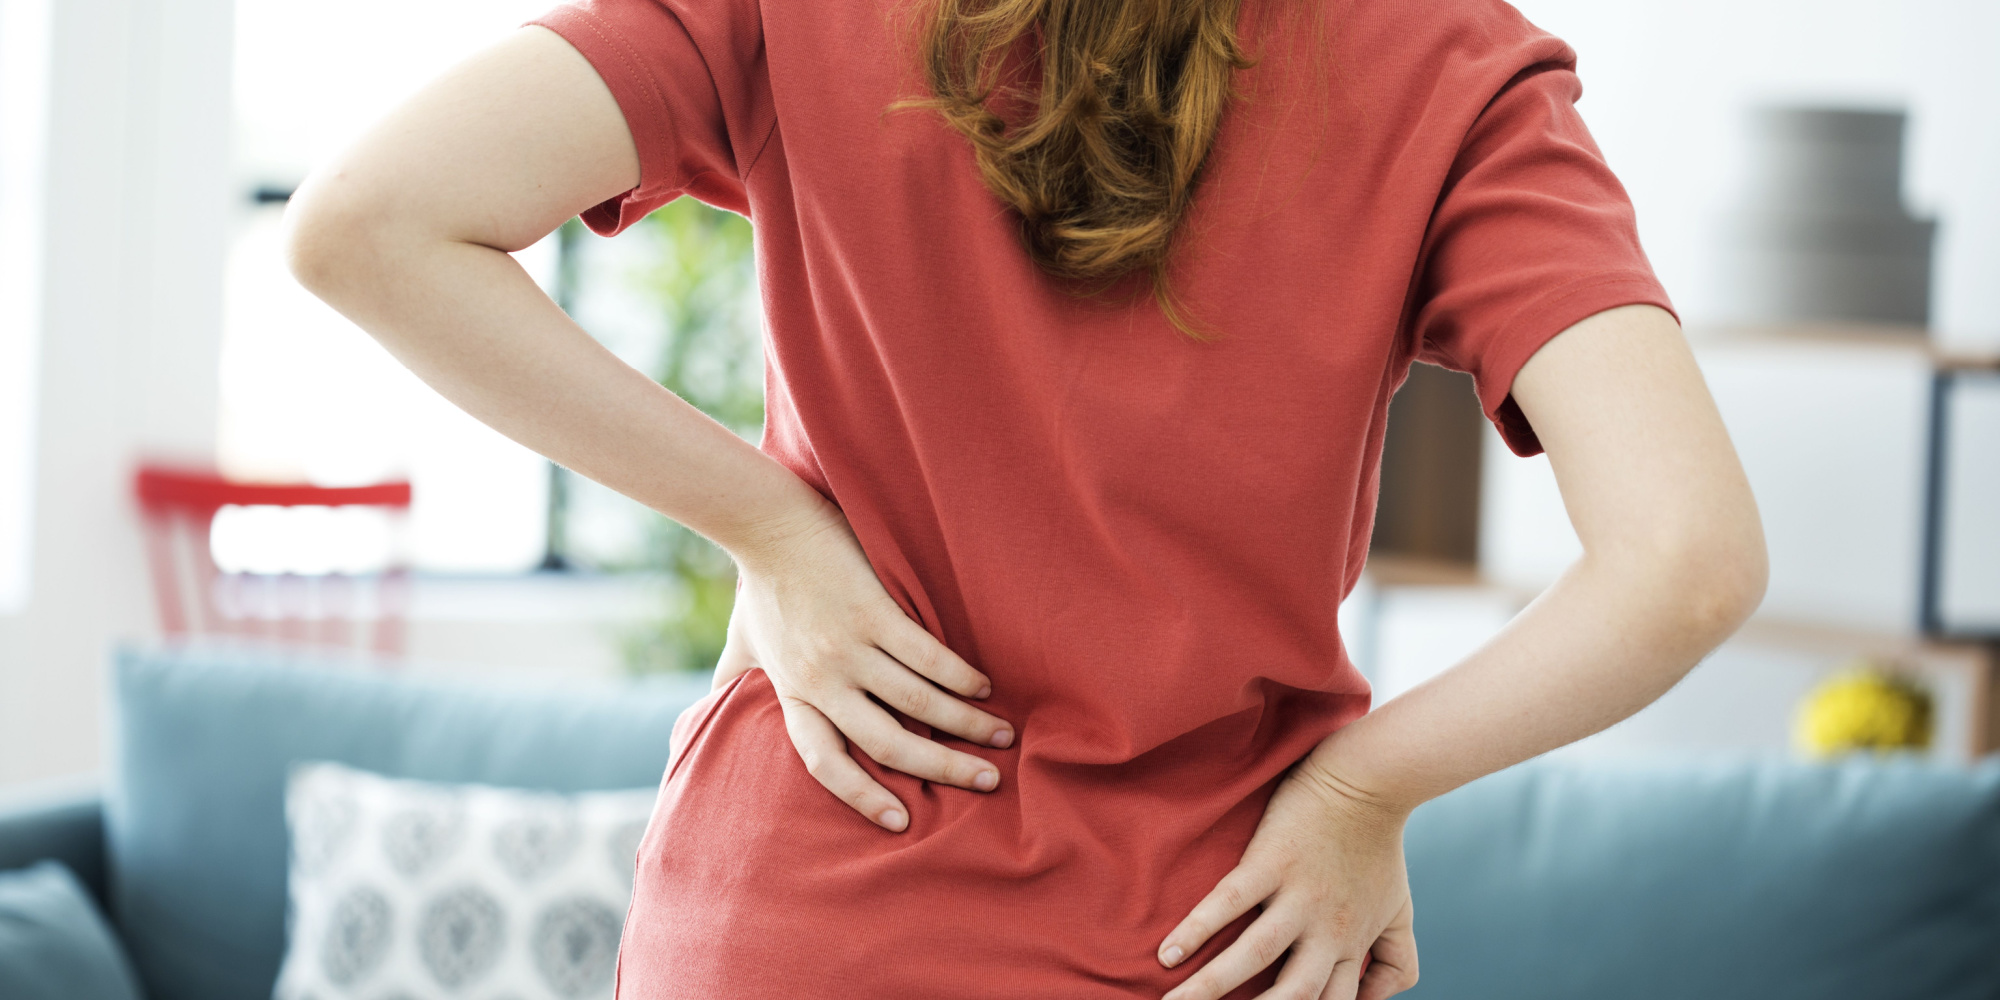 Can You Alleviate Chronic Back Pain Naturally?